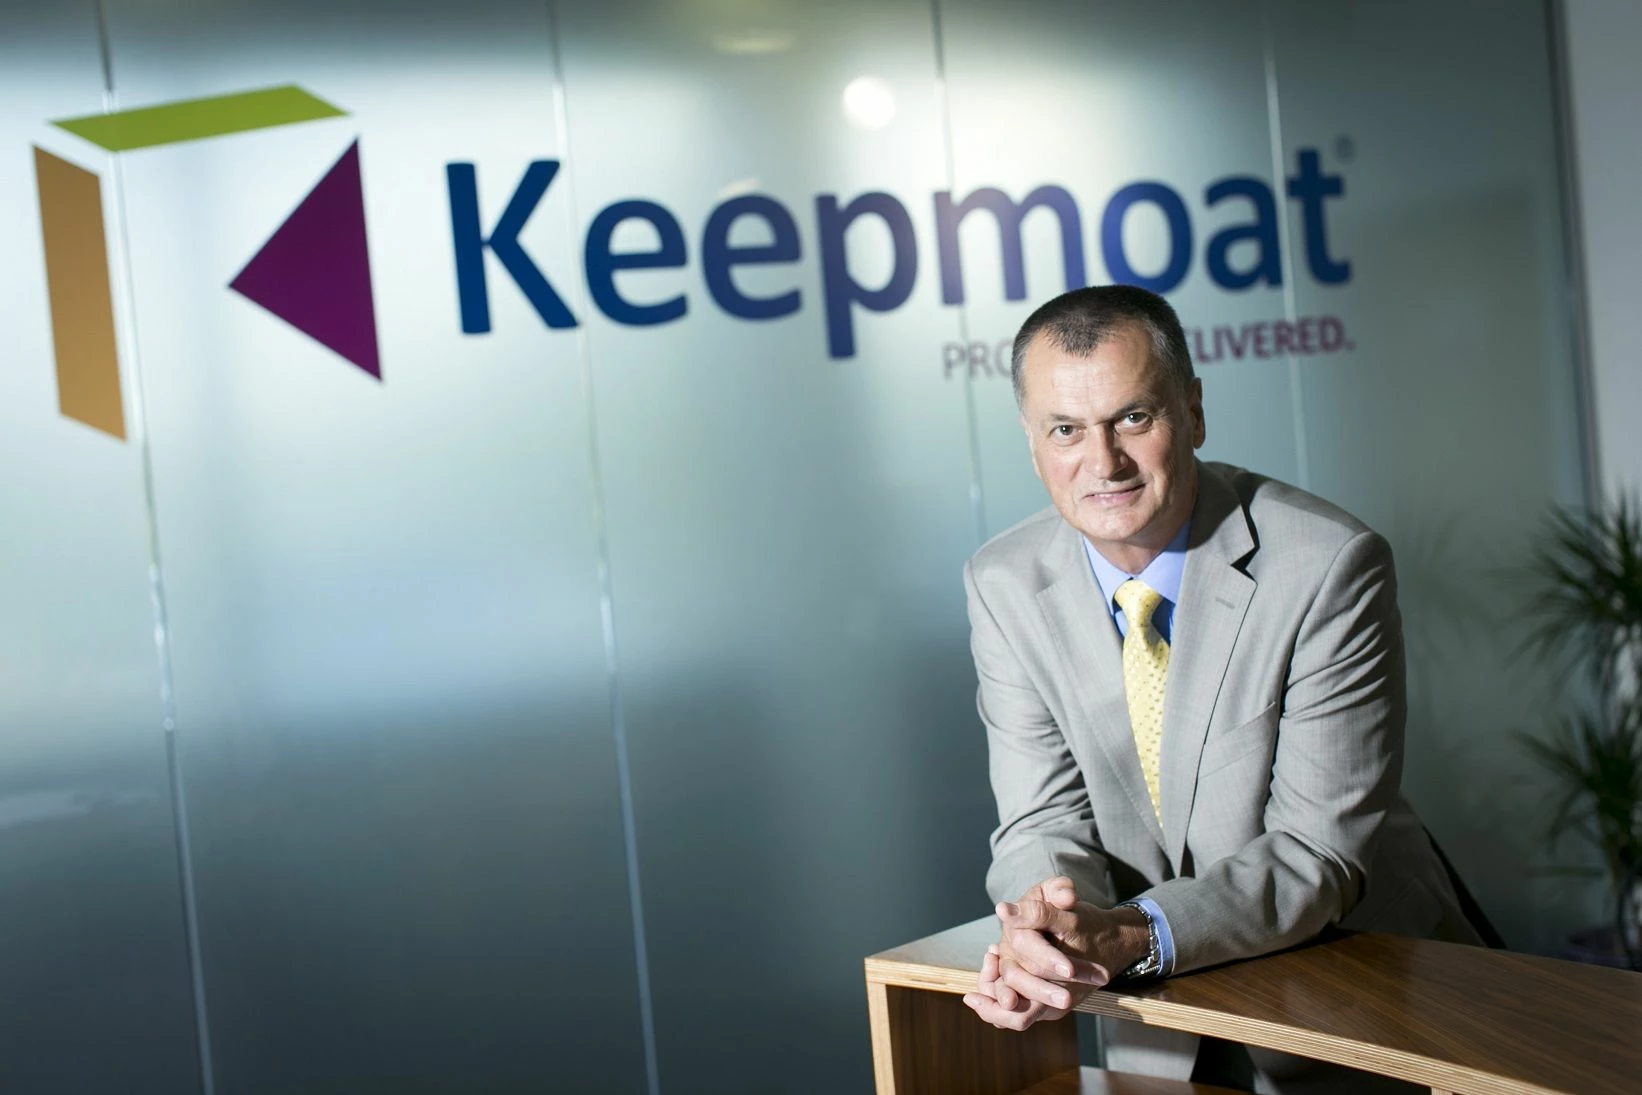 Sandy McBride Managing Director of Keepmoat Homes in the North West